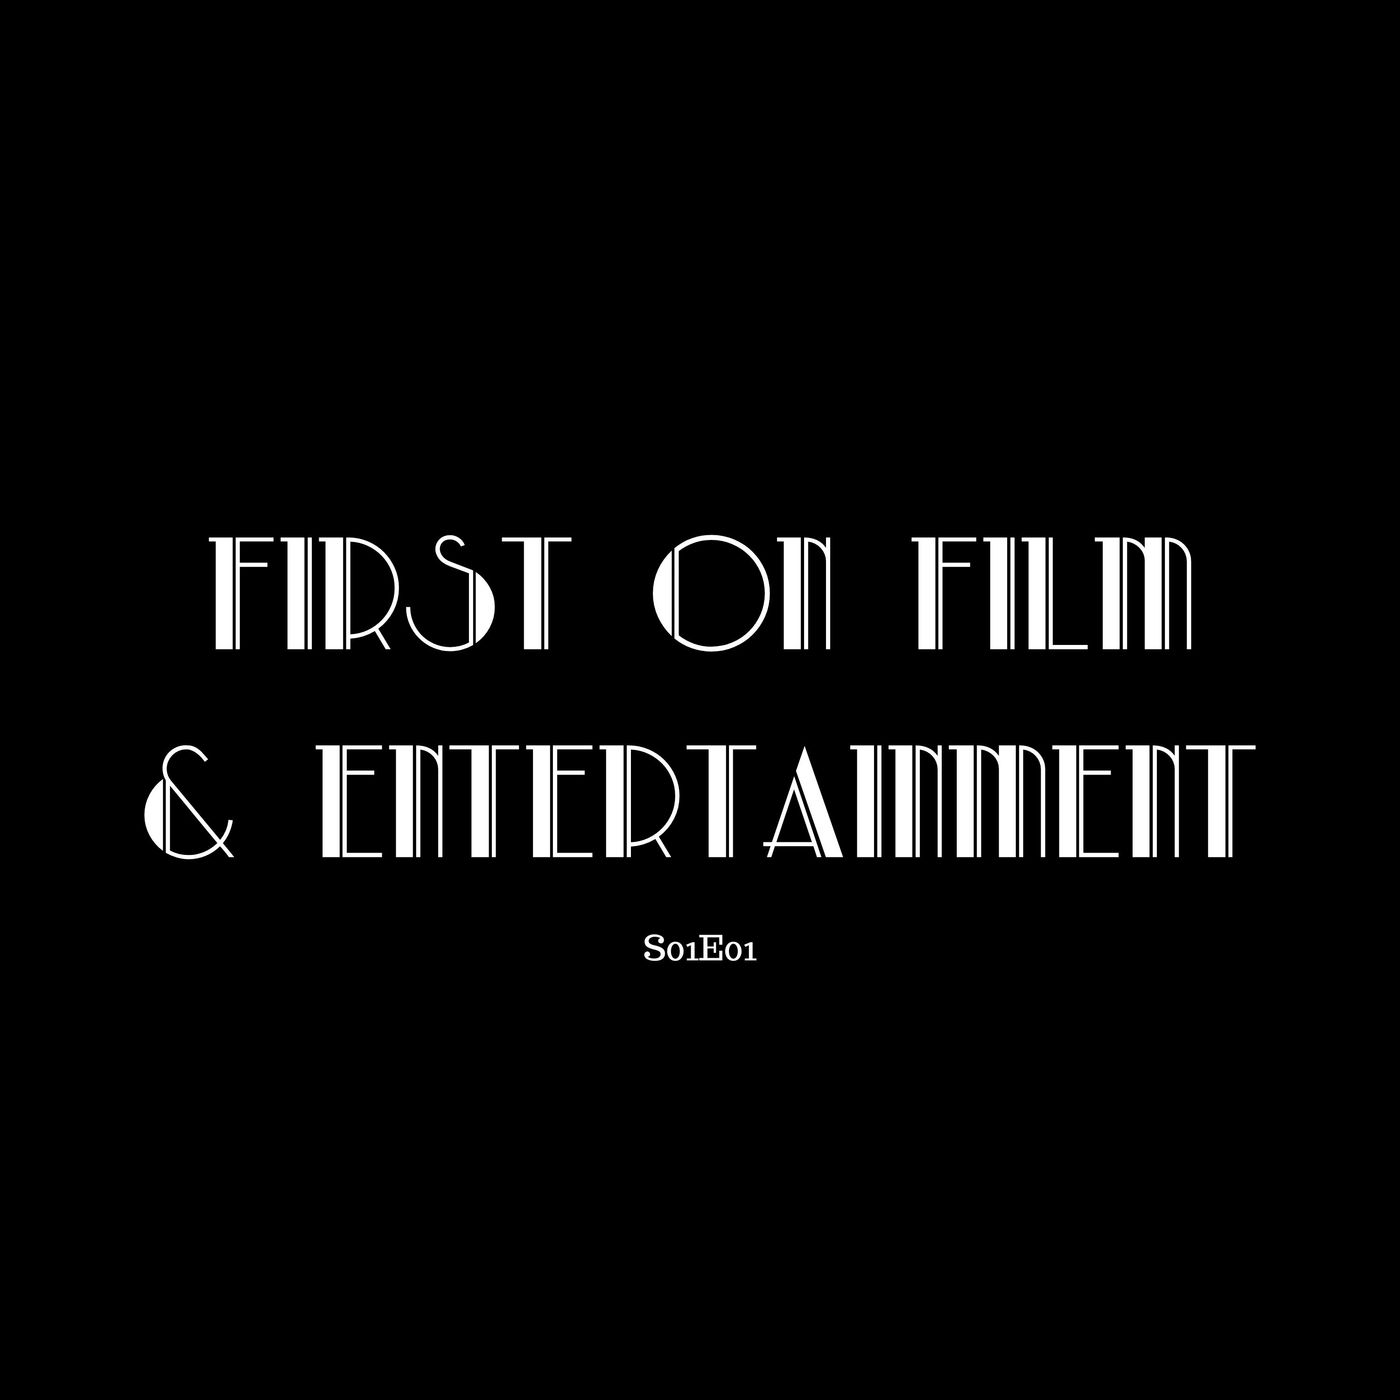 First On Film and Entertainment - S01E01 - Bullet Train Image